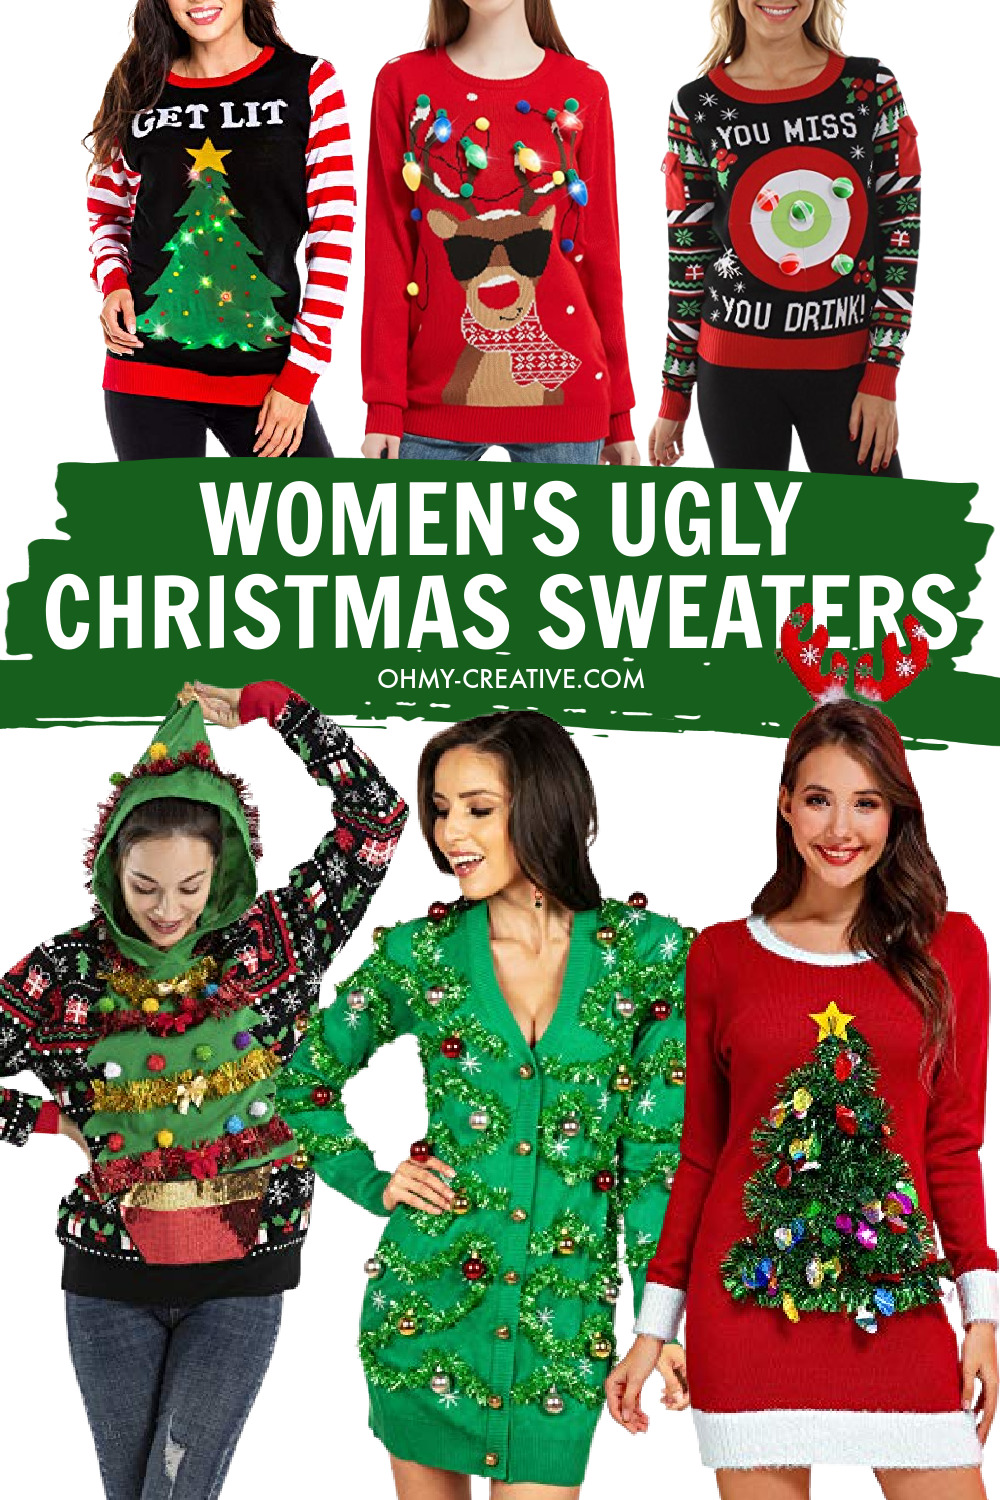 Women's Ugly Christmas Sweaters - Oh My Creative